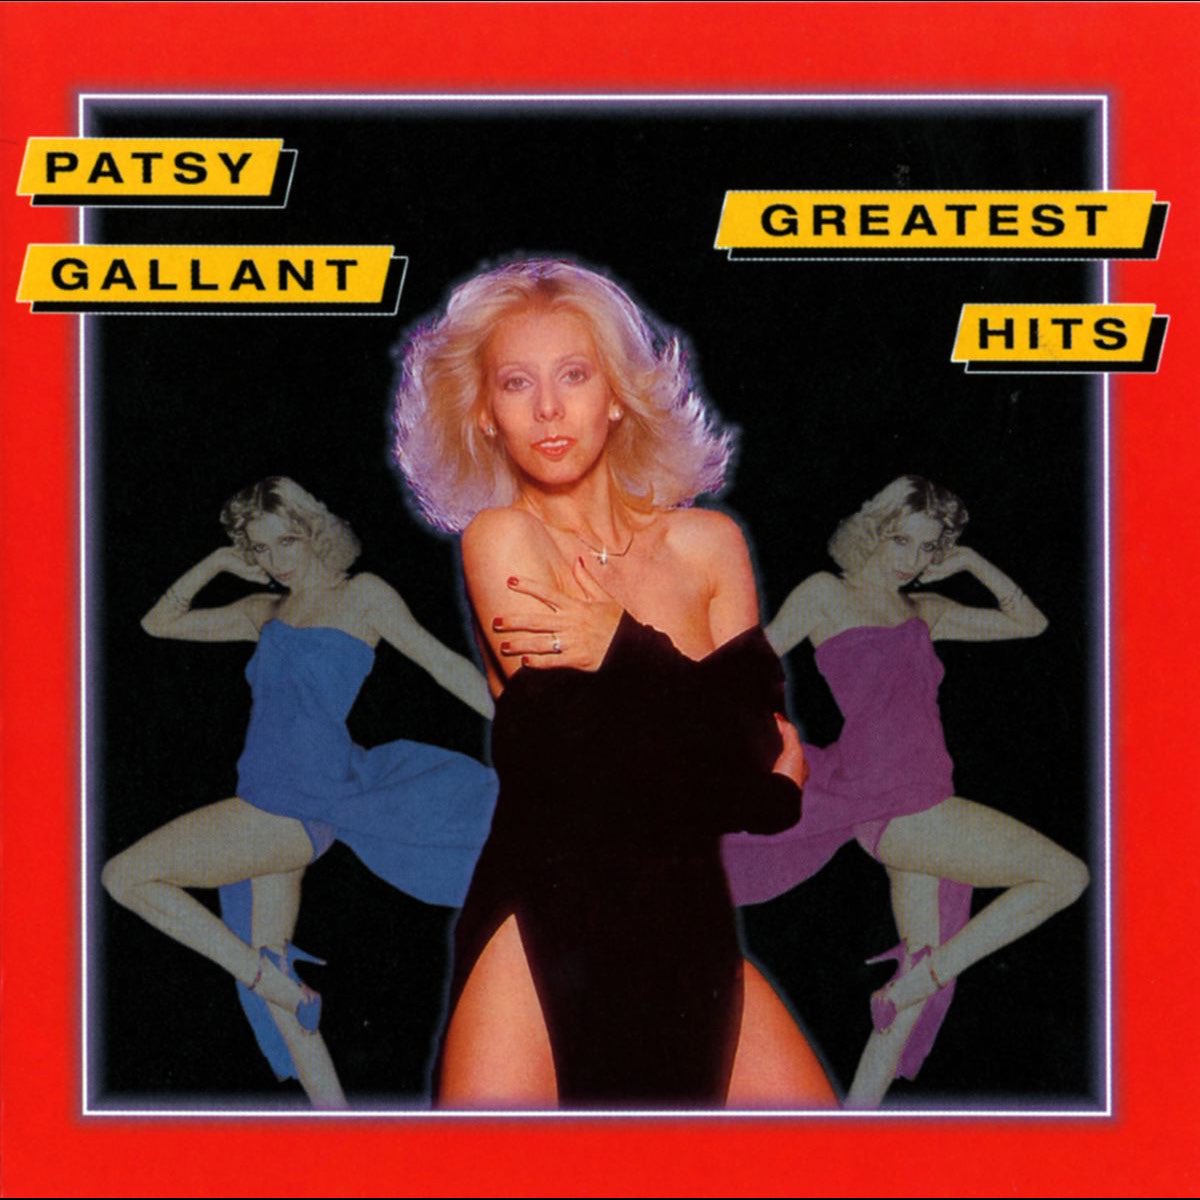 Greatest Hits by Patsy Gallant on Apple Music